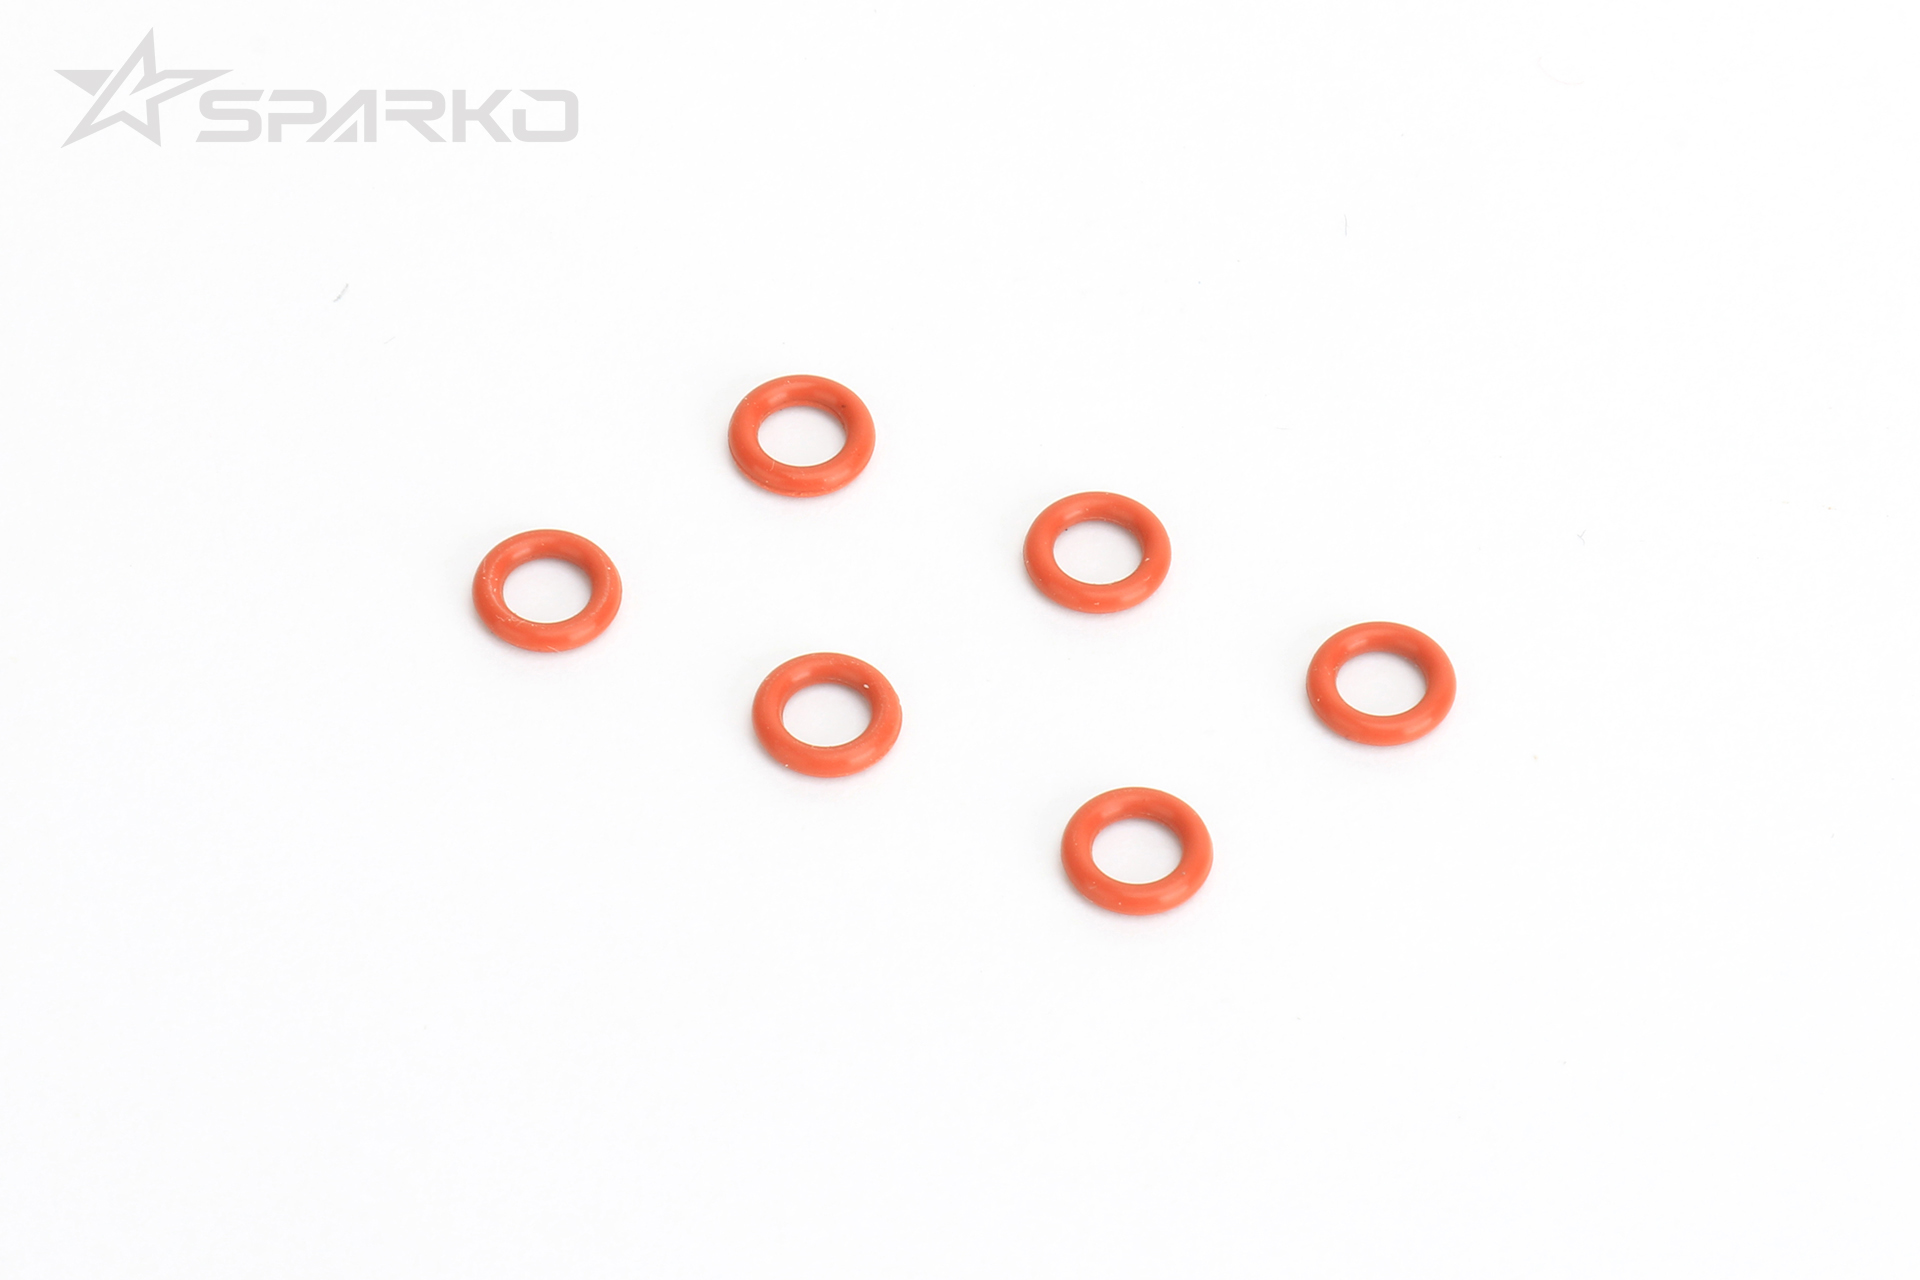 Differential O-Rings (6pcs)